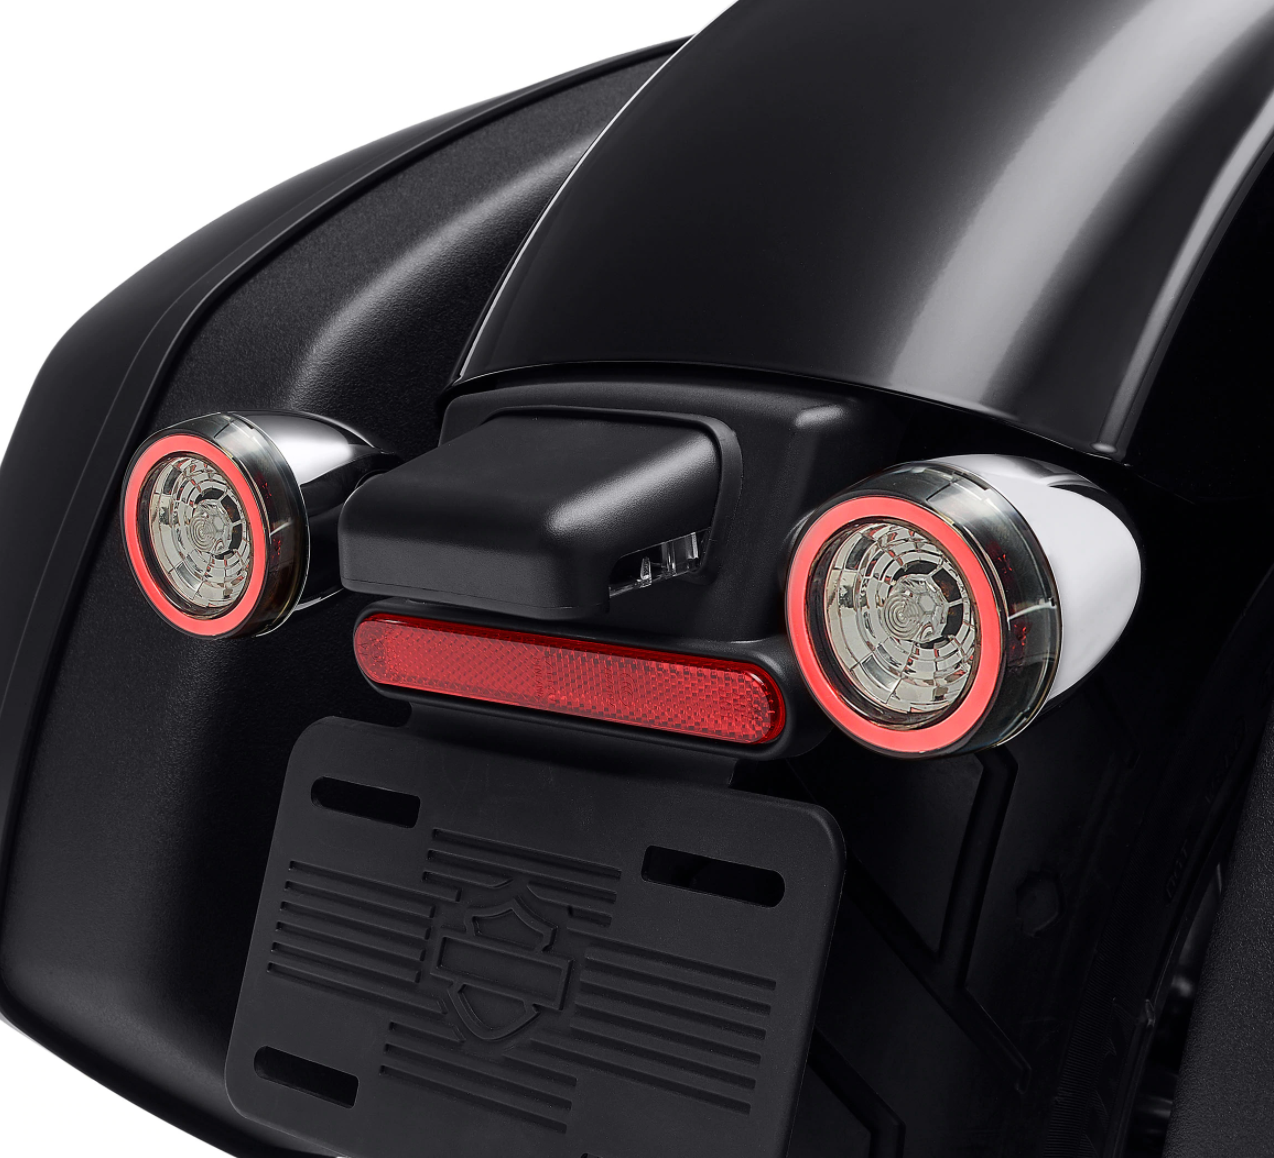 Harley-Davidson® Rear Signature LED Turn Signal Indicator Inserts - '14-Later DYNA / SPORTSTER / TOURING / '14-'17 SOFTAIL - 67801151 (CHROME) 67801152 (BLACK)  NEW ARRIVAL